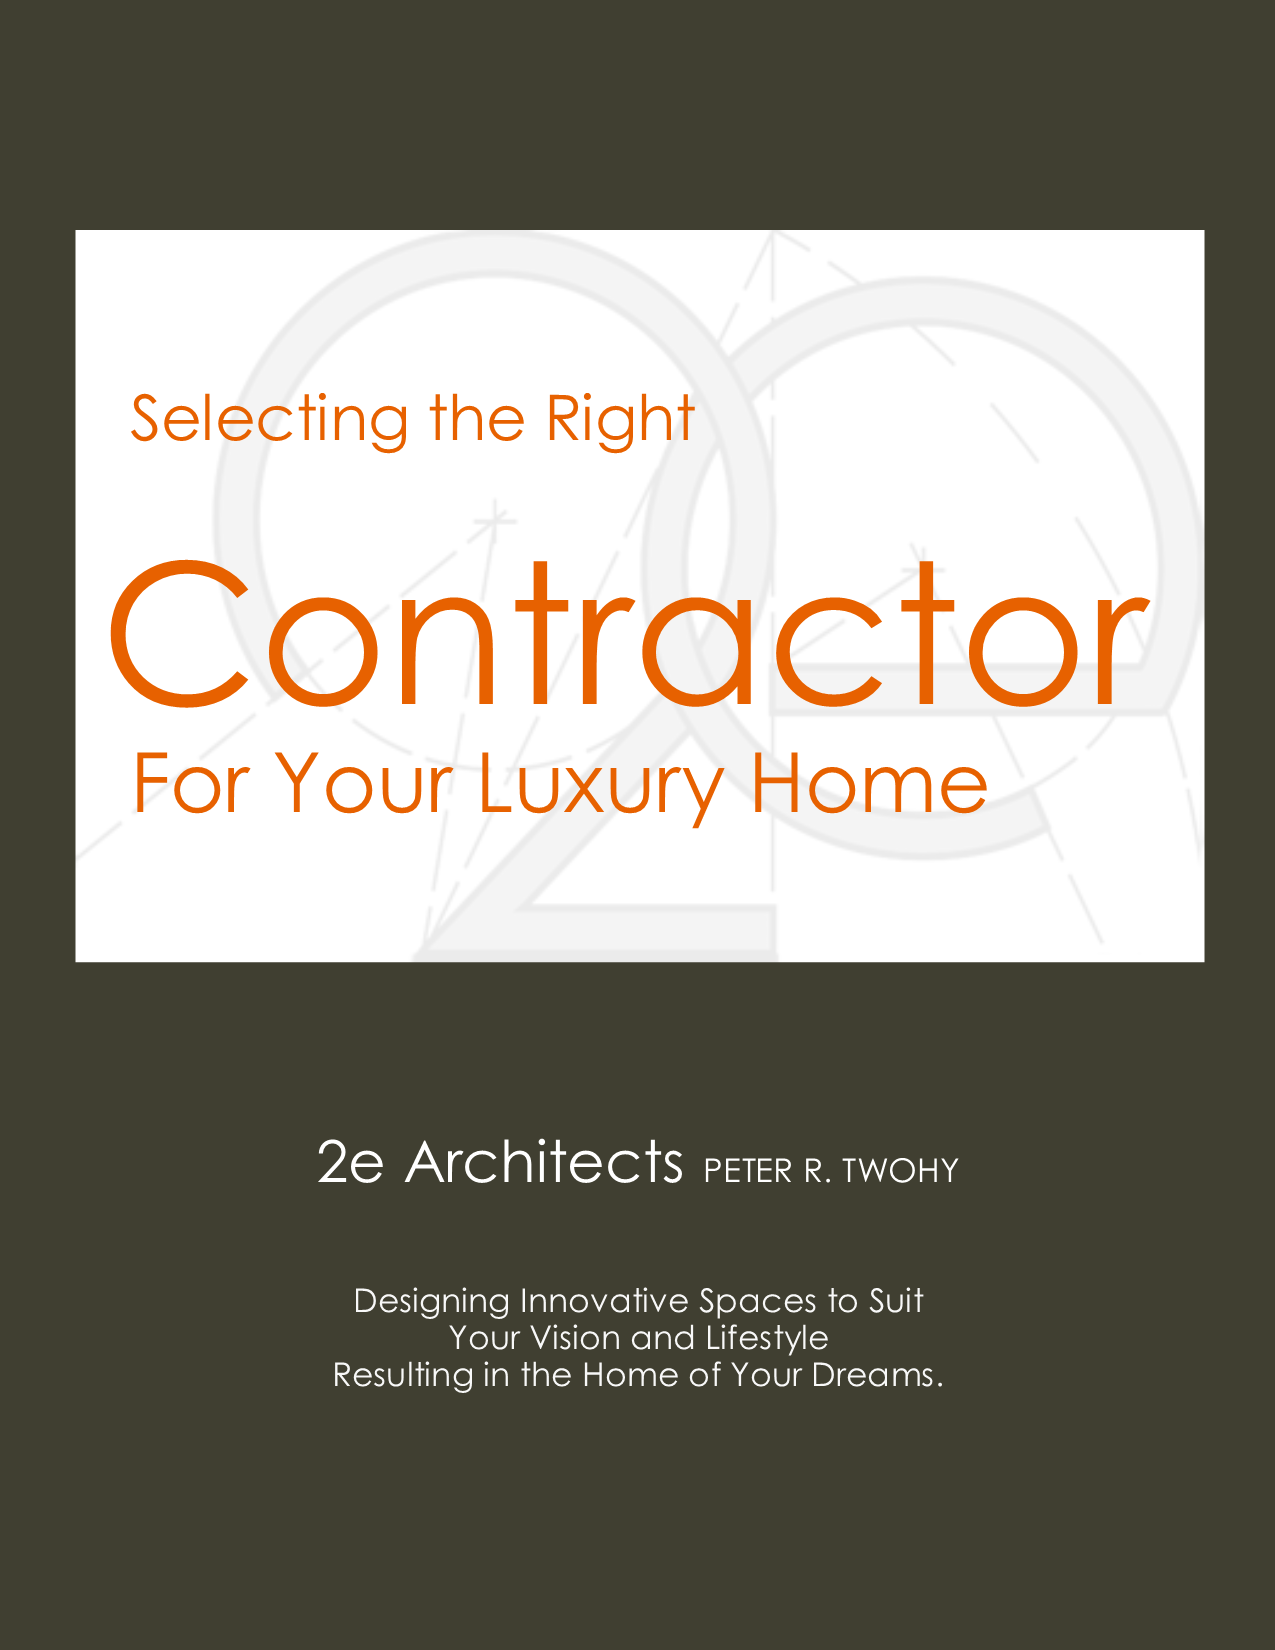 Selecting the Right Contractor for Your Luxury Home